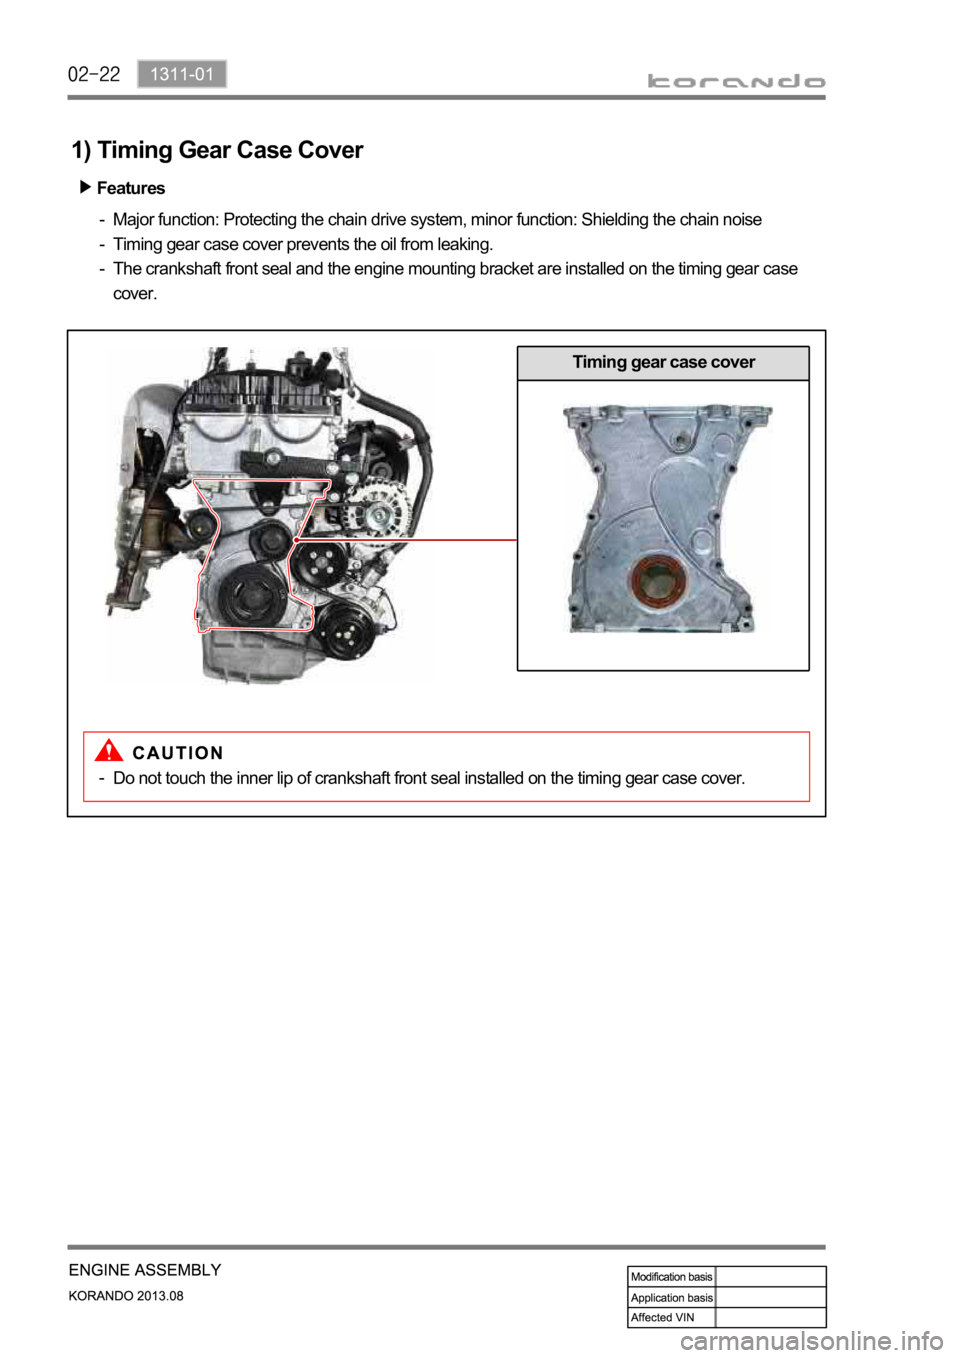 SSANGYONG KORANDO 2013 Owners Guide 1) Timing Gear Case Cover
Features
Major function: Protecting the chain drive system, minor function: Shielding the chain noise 
Timing gear case cover prevents the oil from leaking.
The crankshaft fr